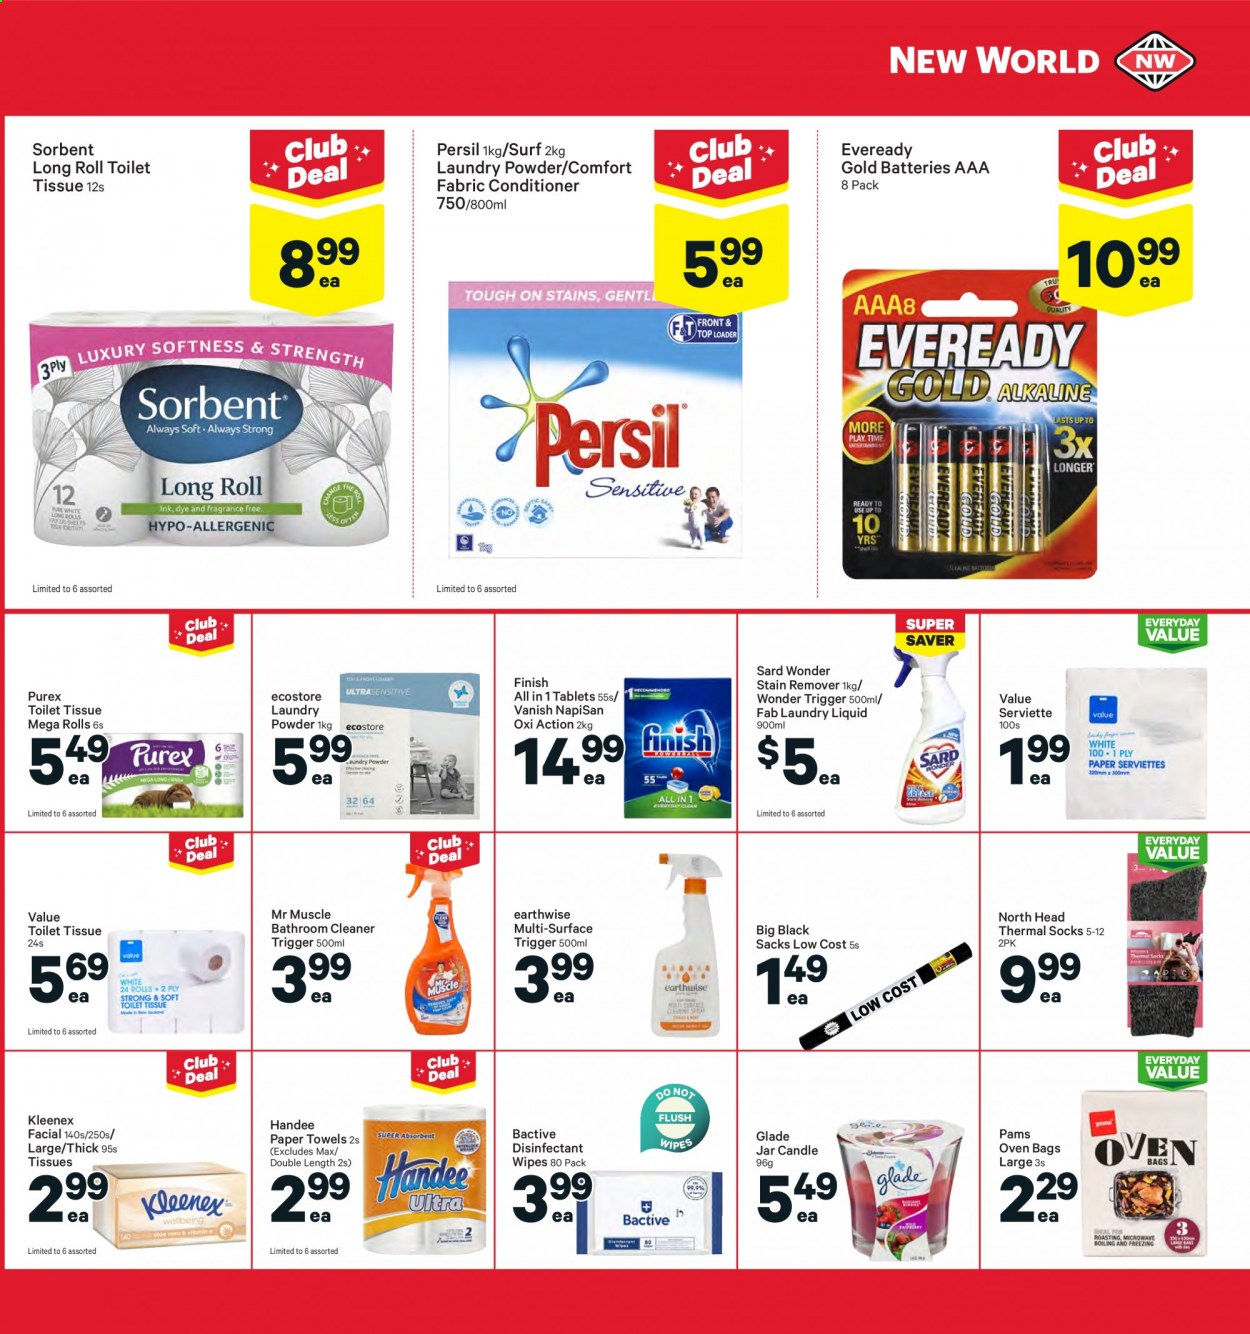 thumbnail - New World mailer - 12.07.2021 - 18.07.2021 - Sales products - wipes, Kleenex, toilet paper, Handee, kitchen towels, paper towels, desinfection. Page 27.